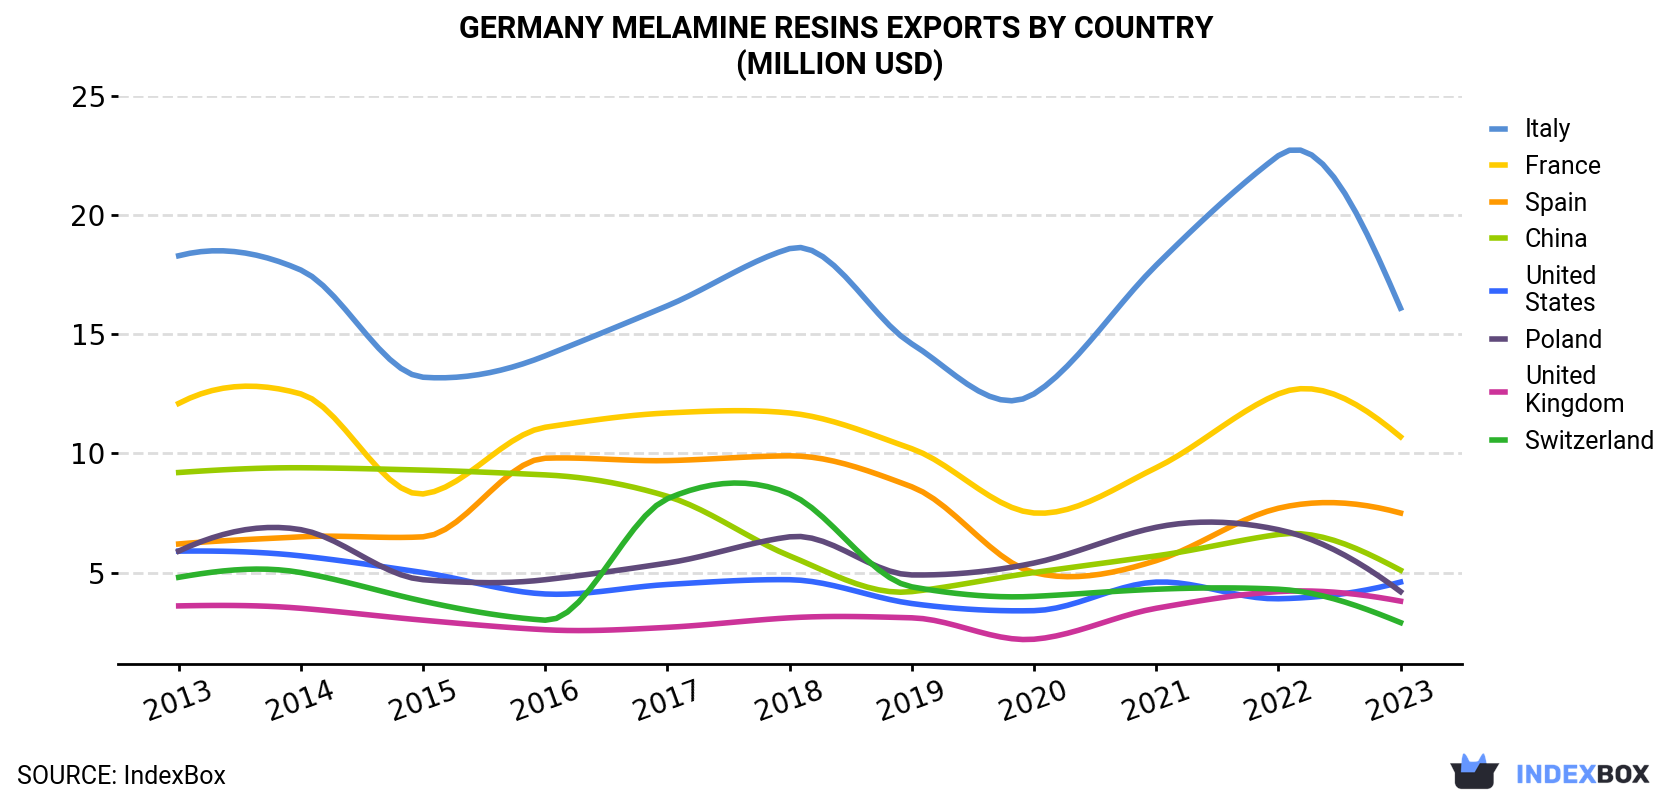 Germany Melamine Resins Exports By Country (Million USD)